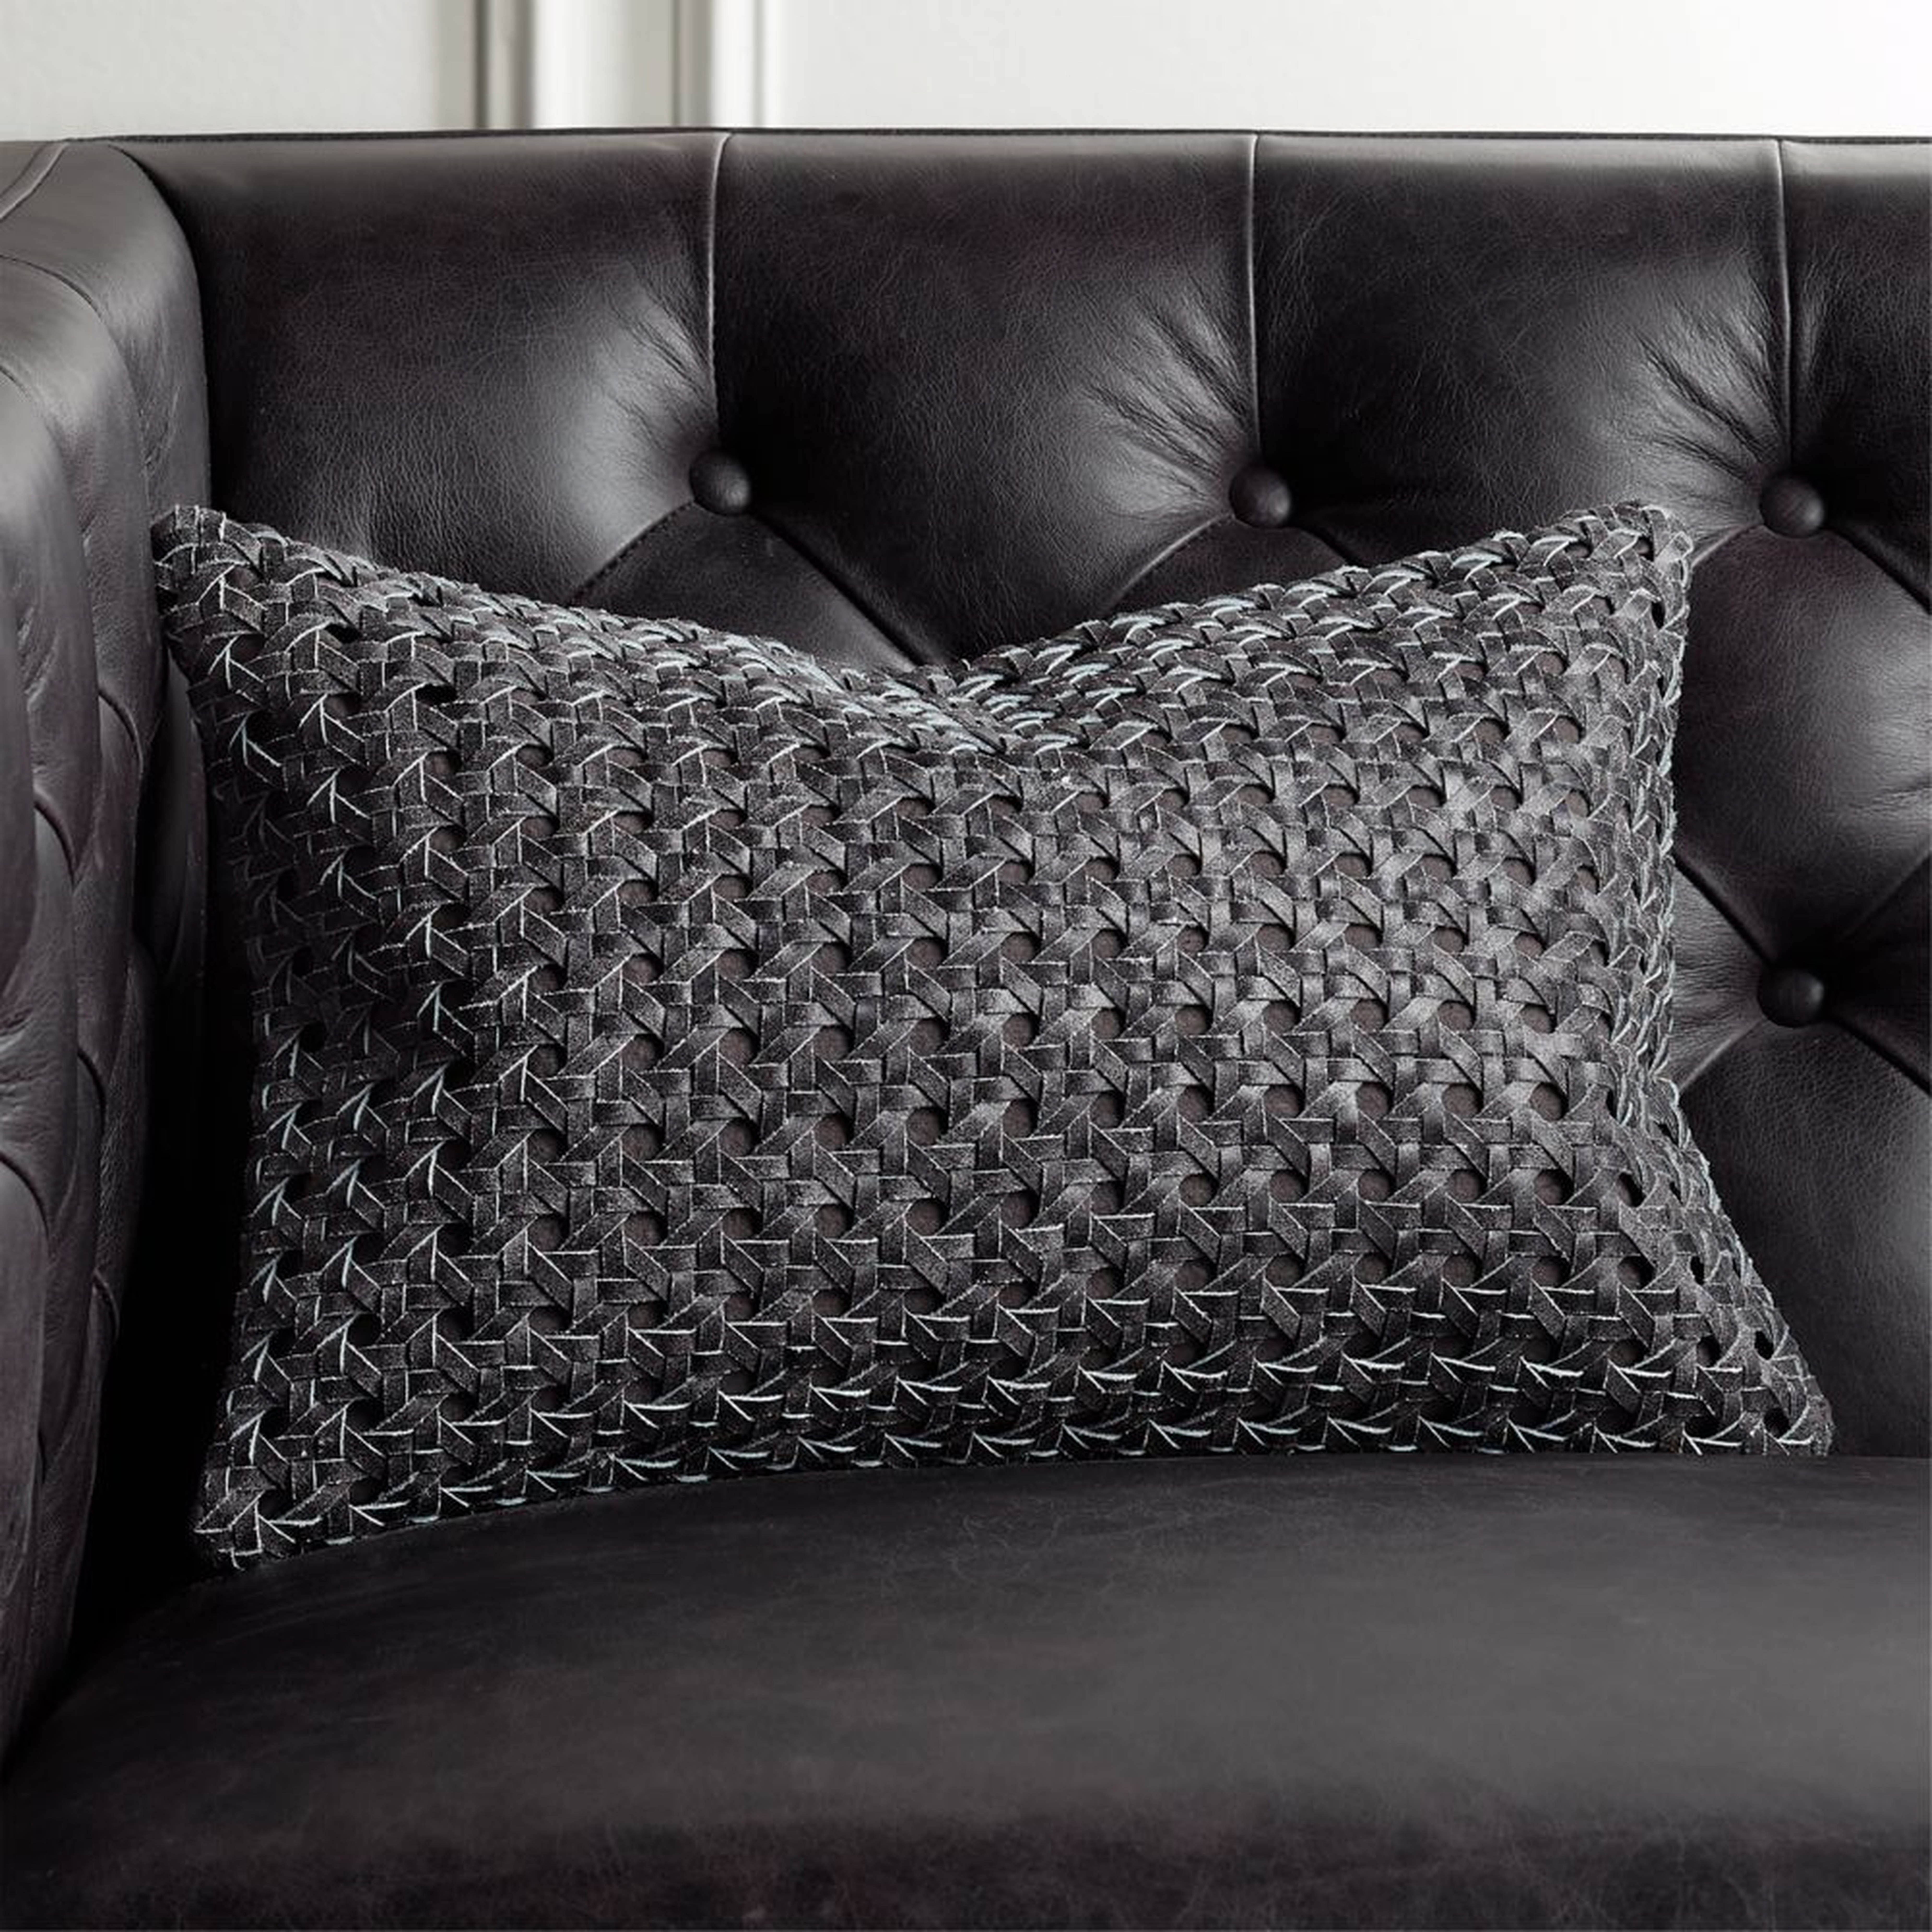 18"x12" Grey Woven Leather Pillow with Down-Alternative Insert - CB2